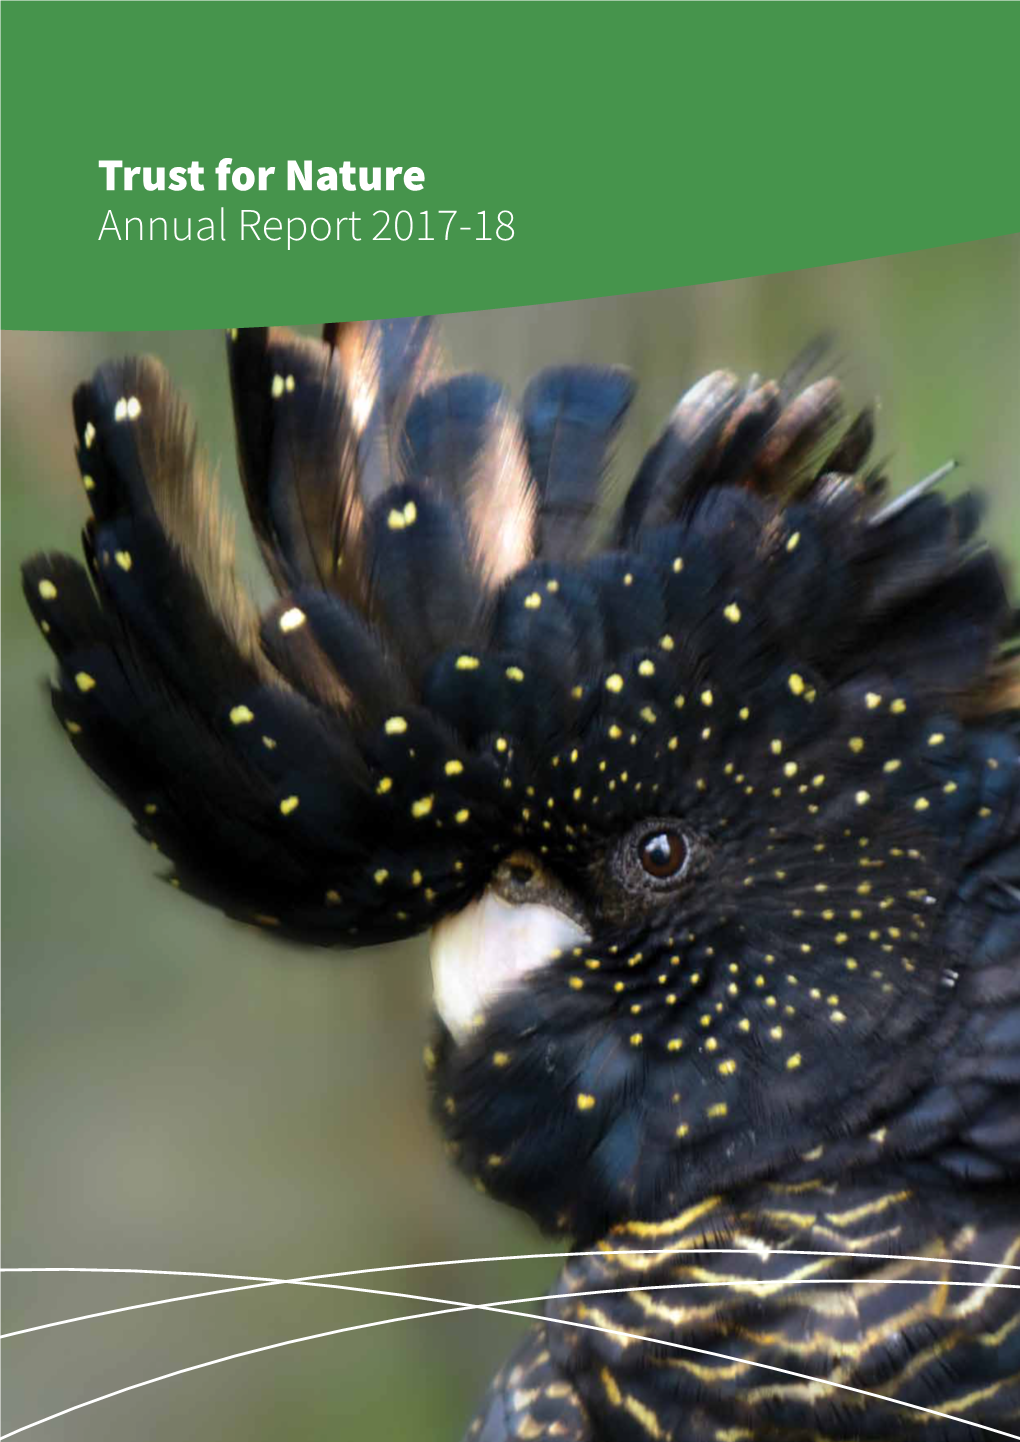 Trust for Nature Annual Report 2017-18 Cover Image: Detail of a Red-Tailed Black Cockatoo (Calyptorhynchus Banksii)